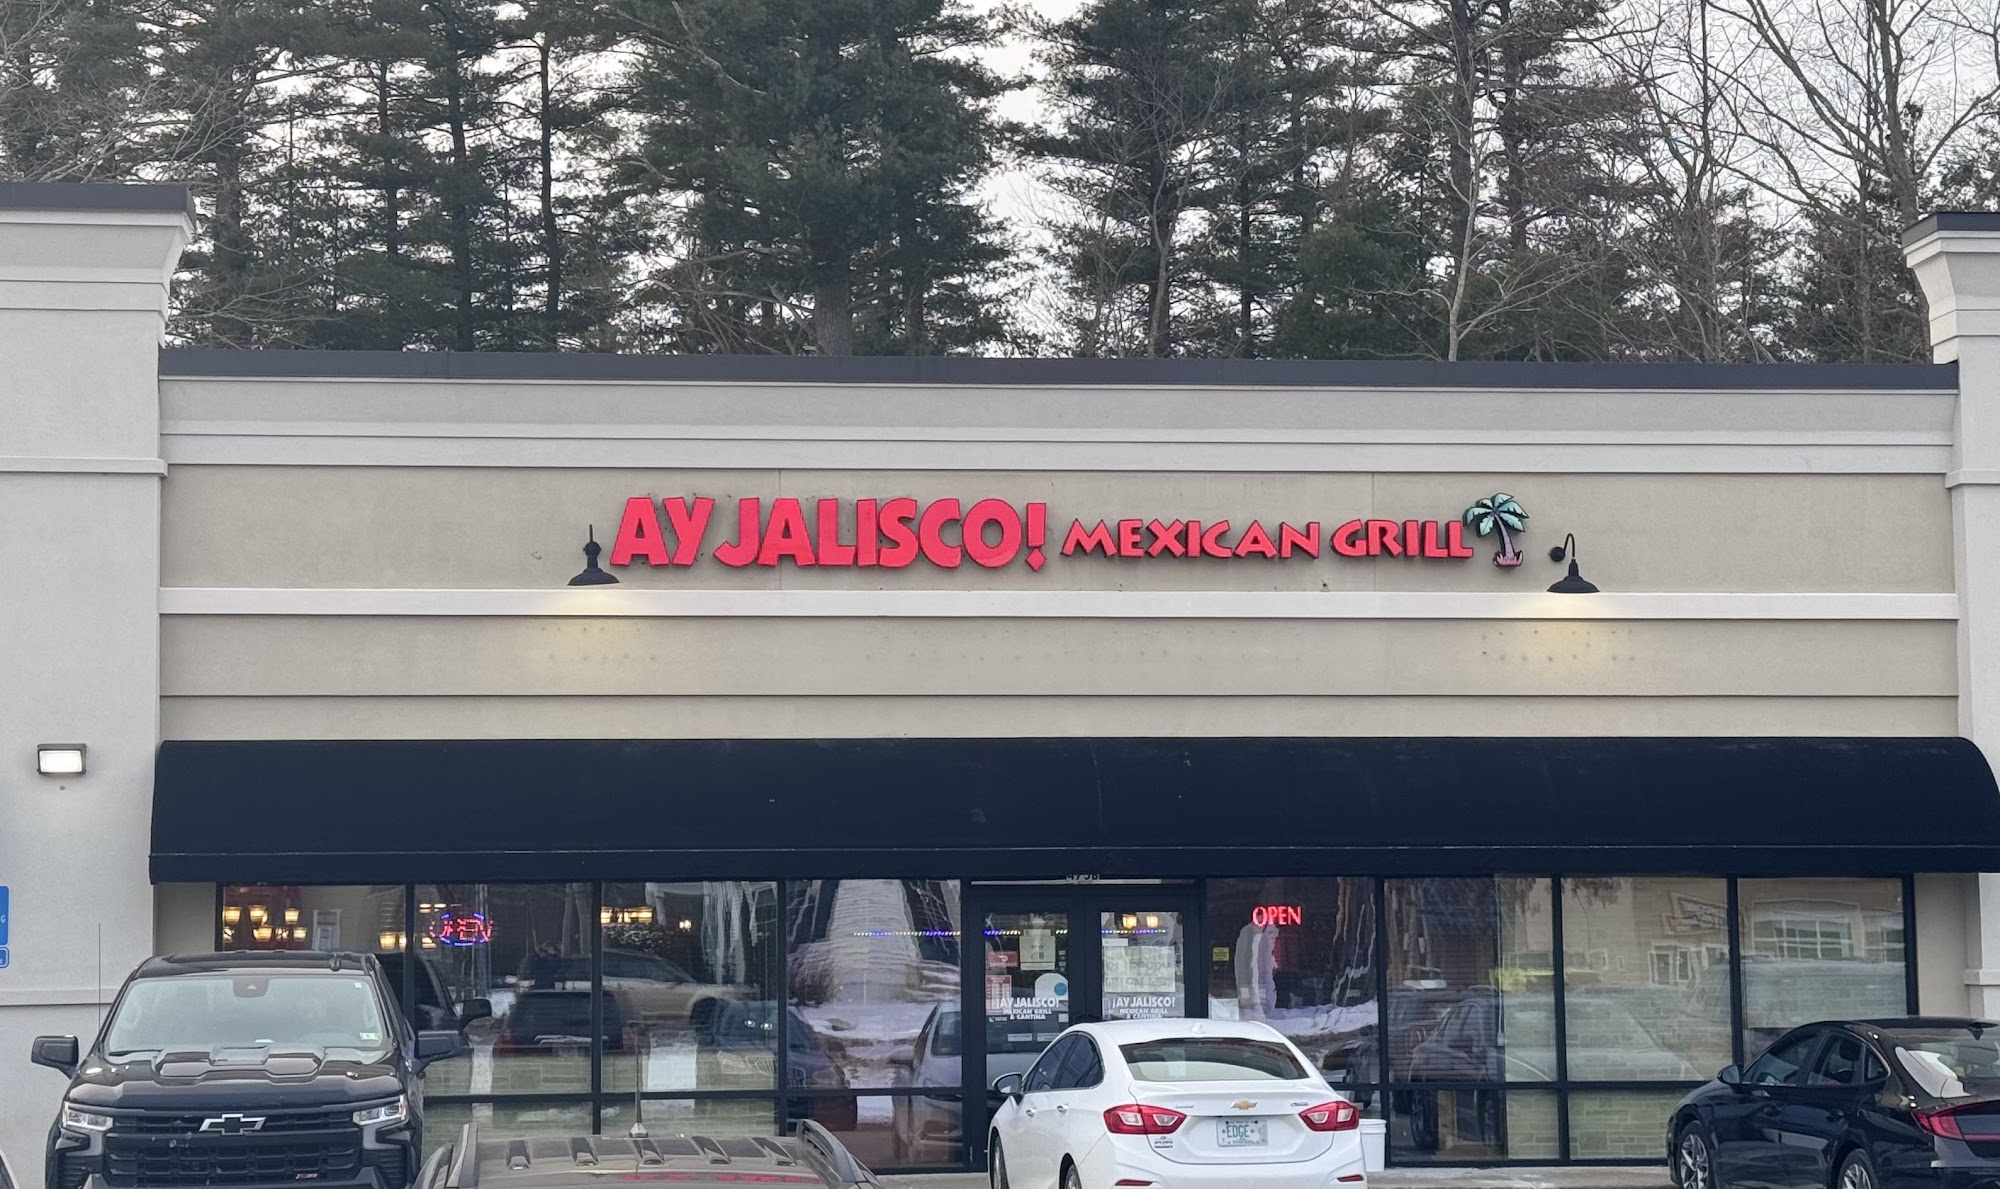 Ay Jalisco Mexican Restaurant Grill and cantina